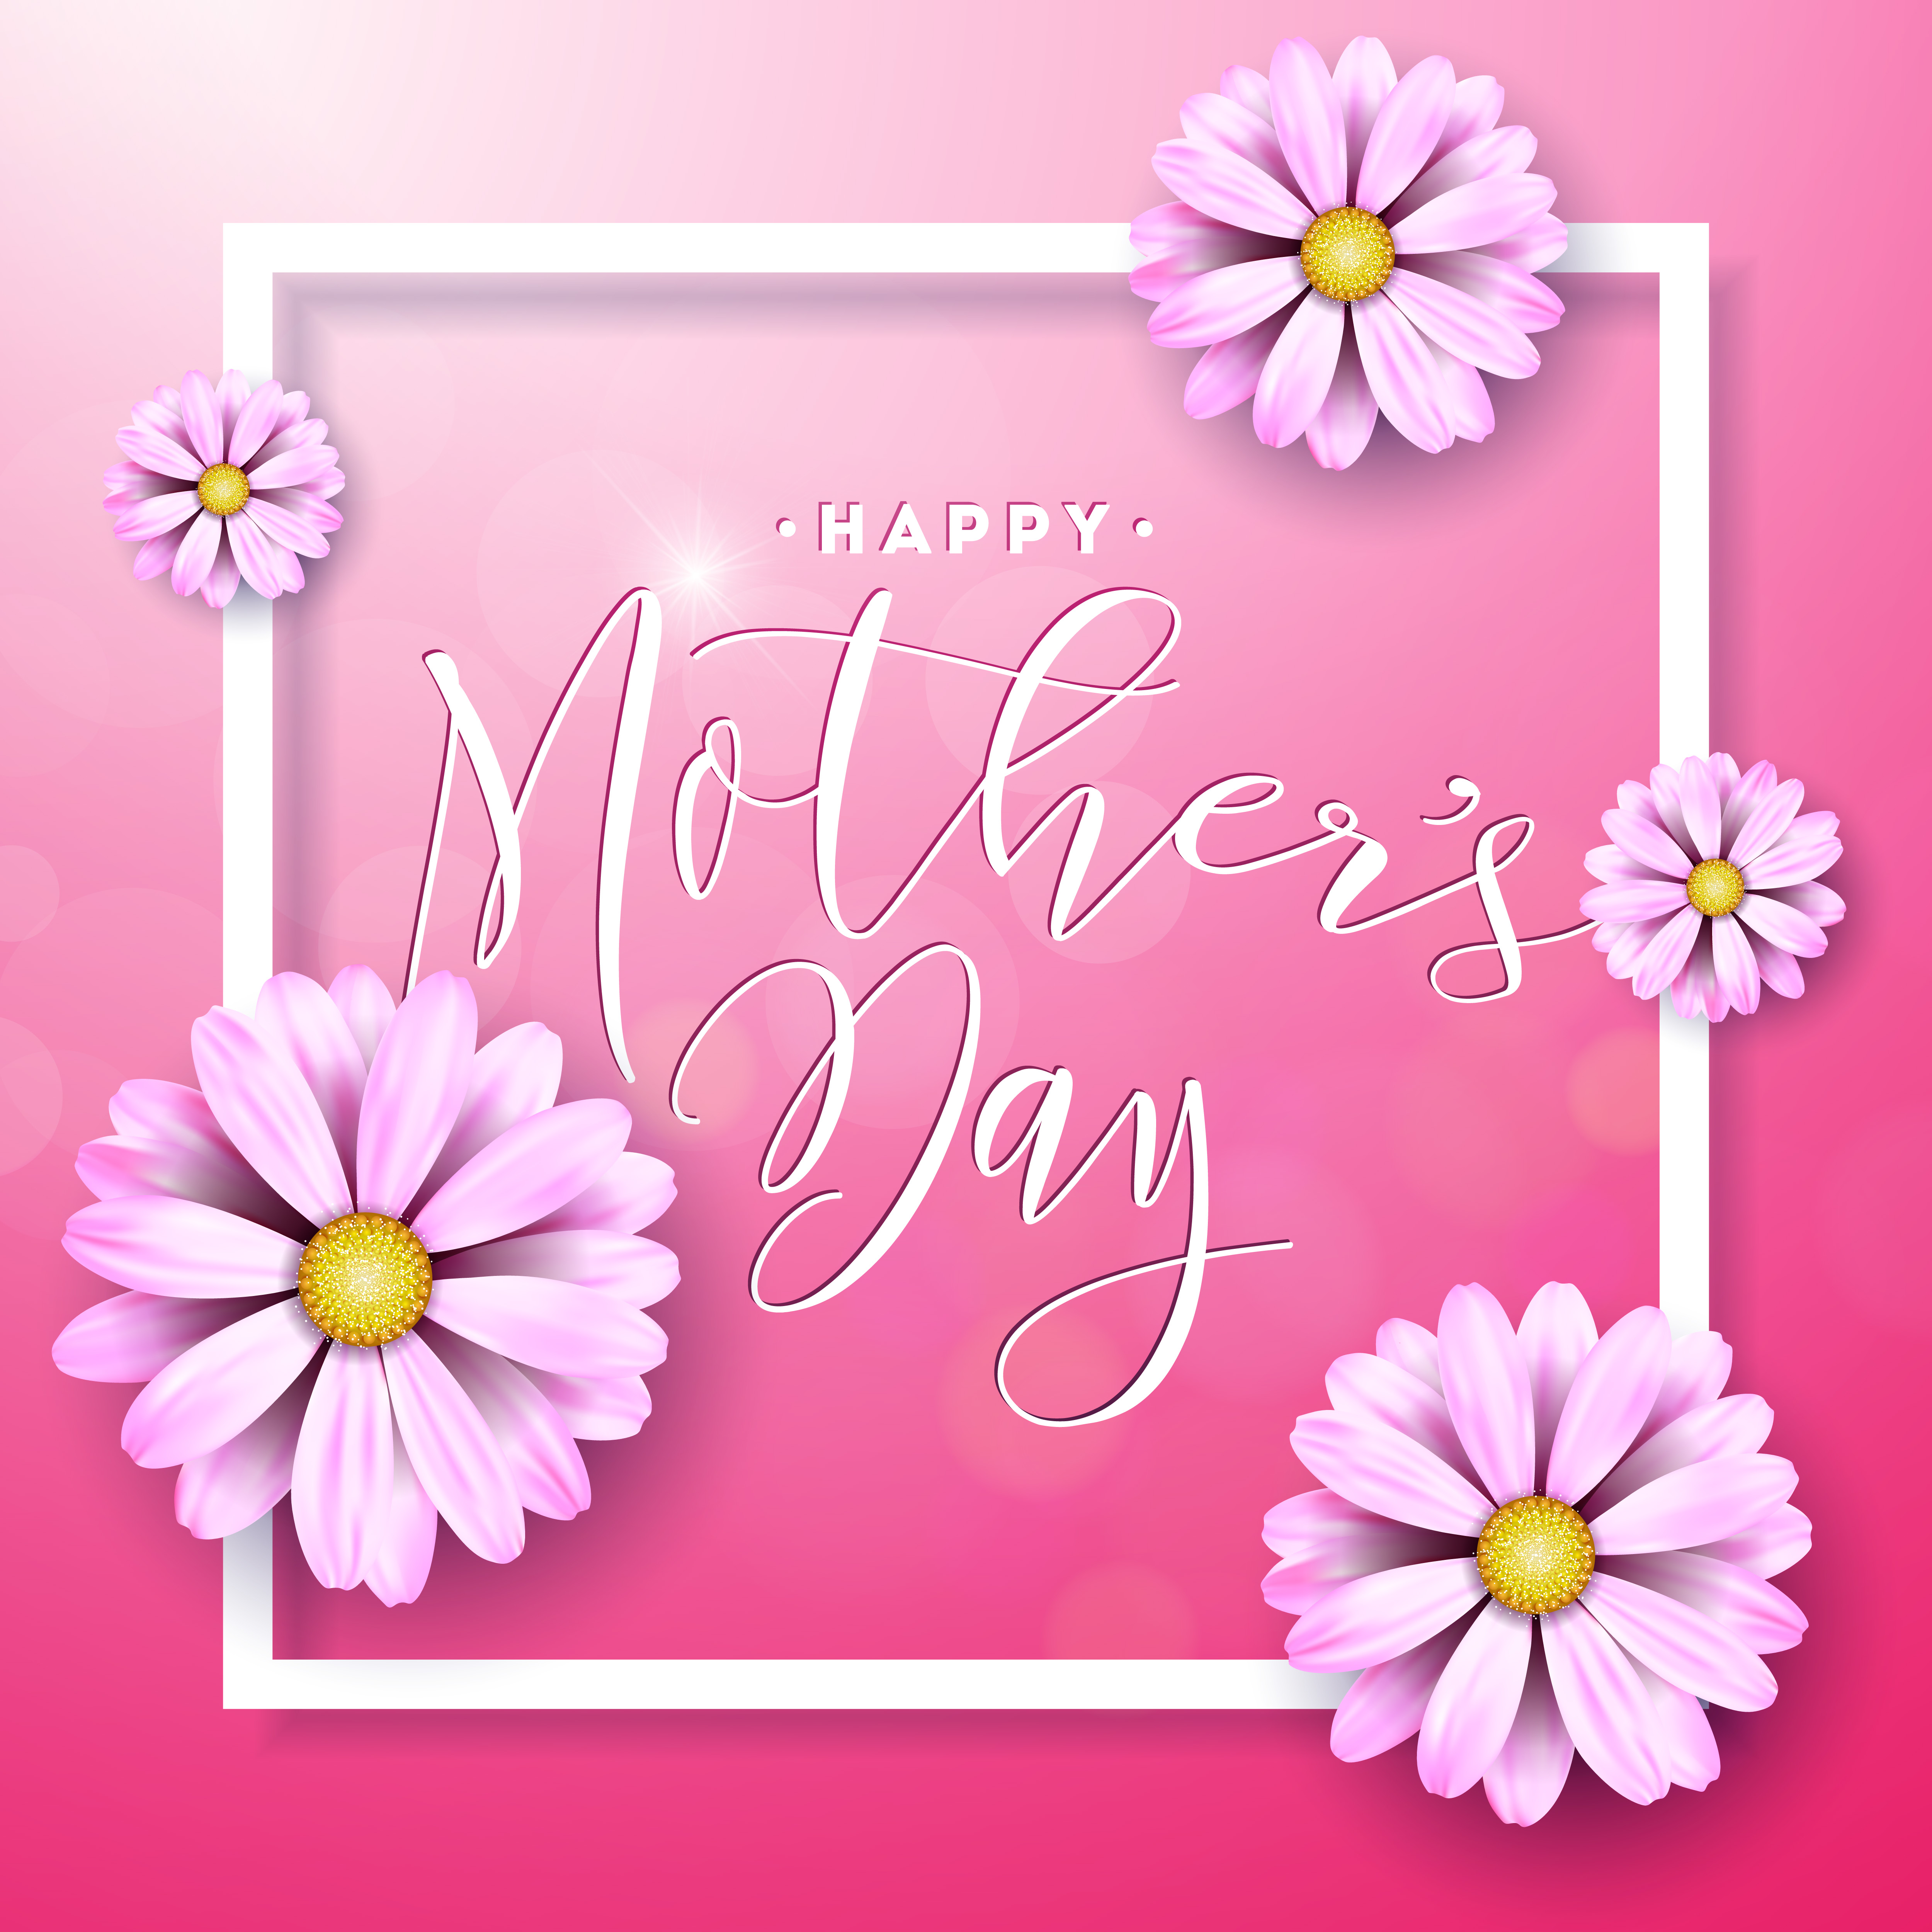 happy-mothers-day-greeting-card-with-flower-on-pink-background-vector